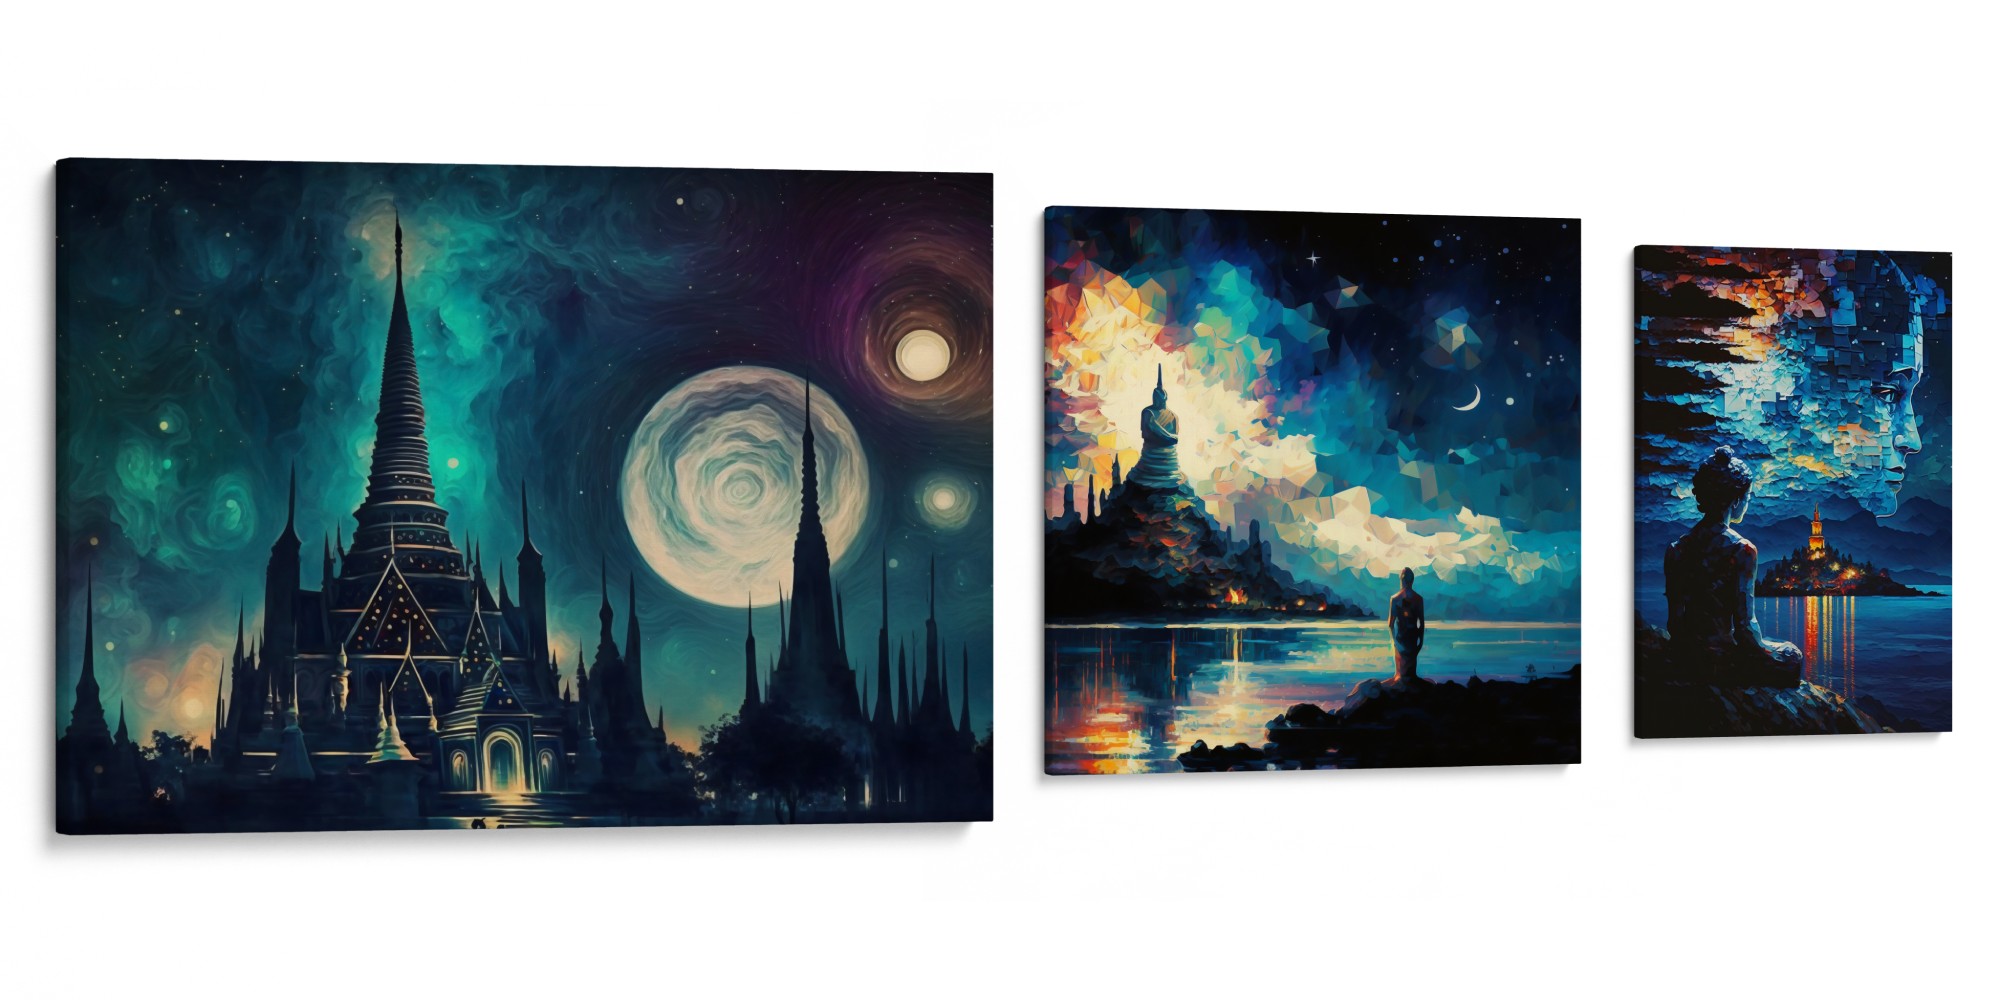 NOBLE NIGHT Canvas Set - Ancient edifices and Buddhas under starry skies, limited edition from Koh Chang Art Studio.